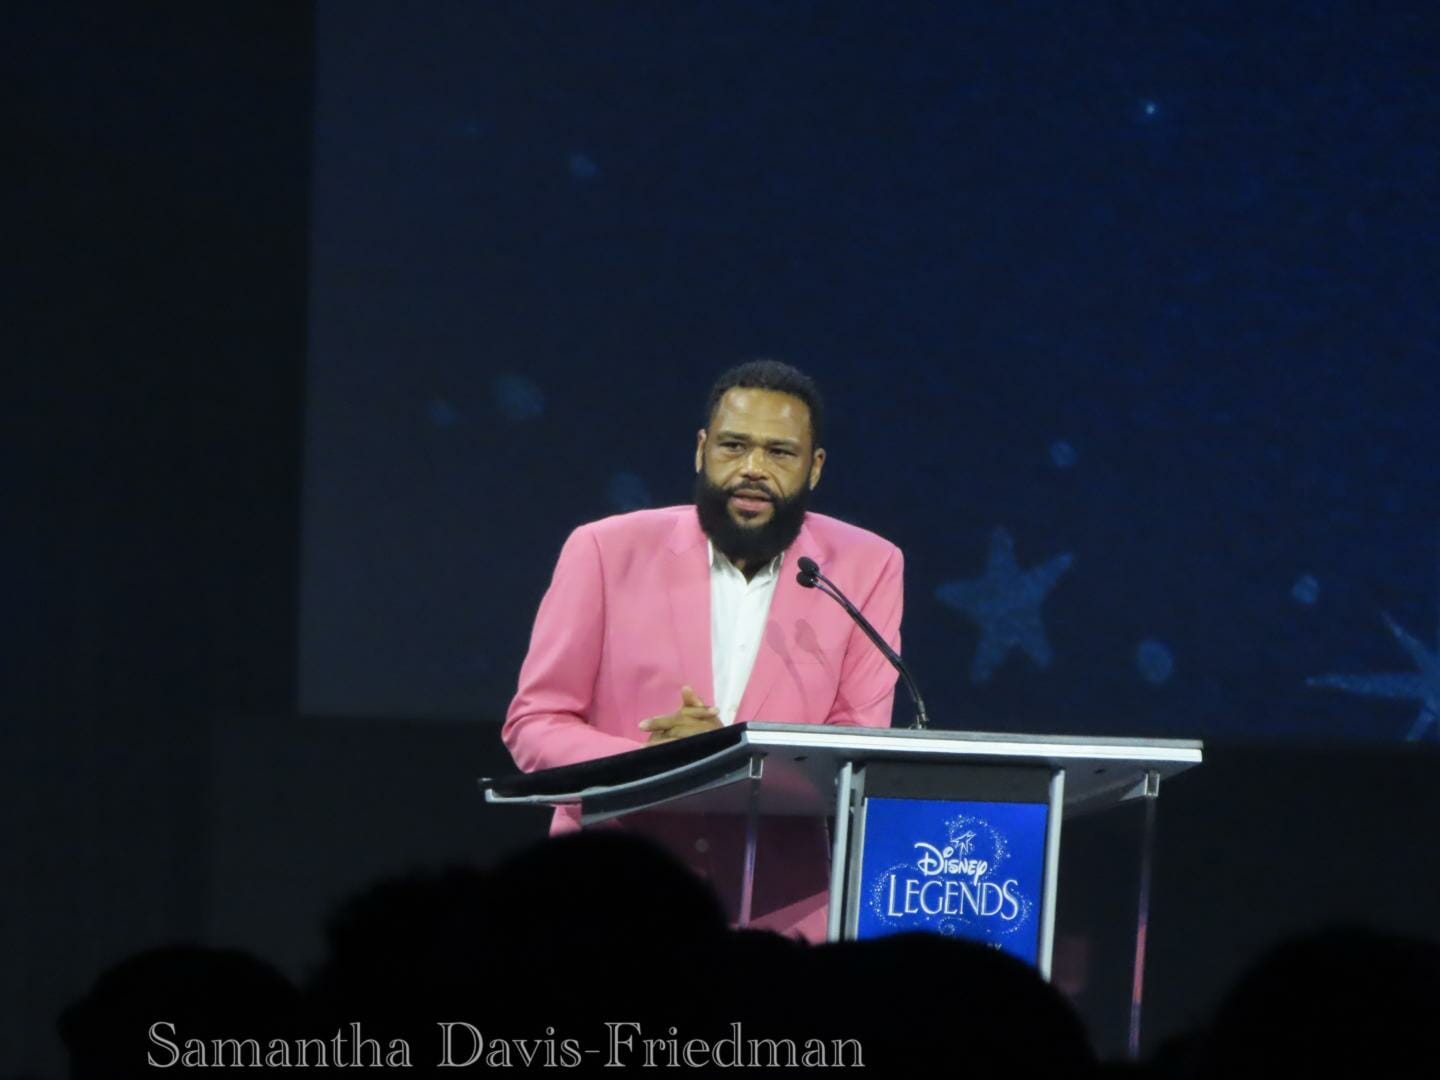 D23 Expo 2022 - Opening Ceremony - Anthony Anderson